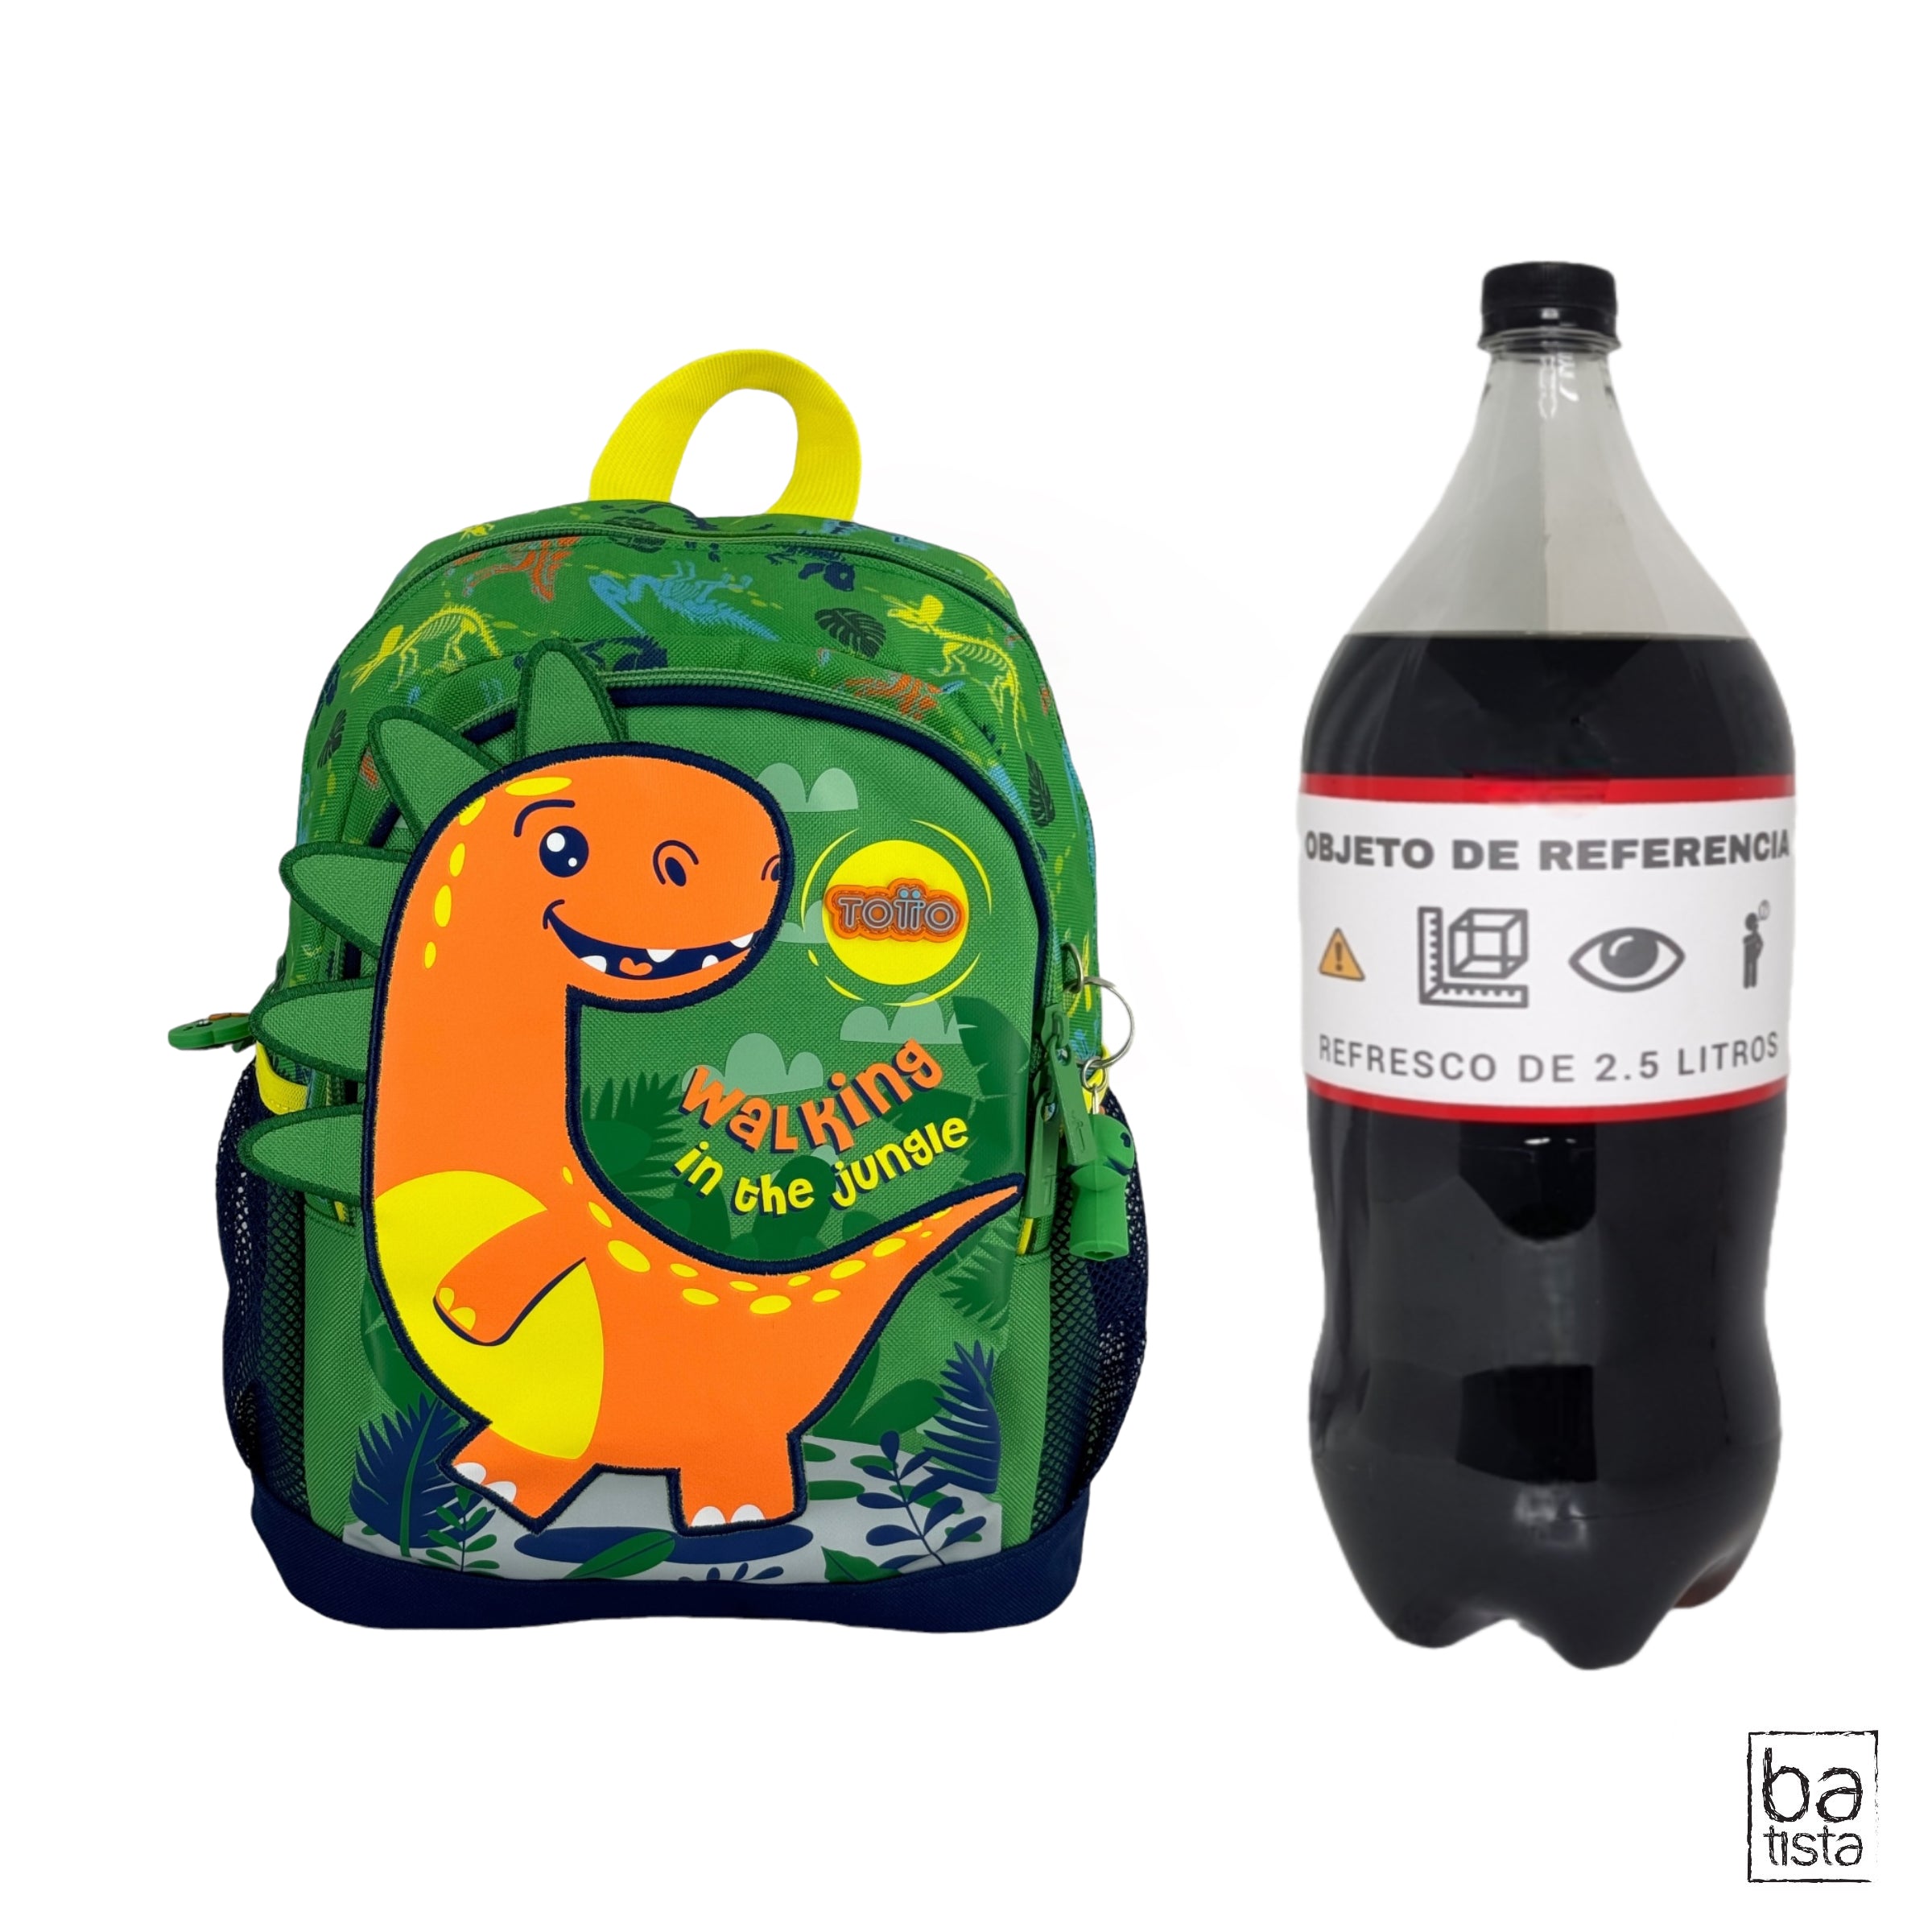 Morral Totto Dinomax S 5D6